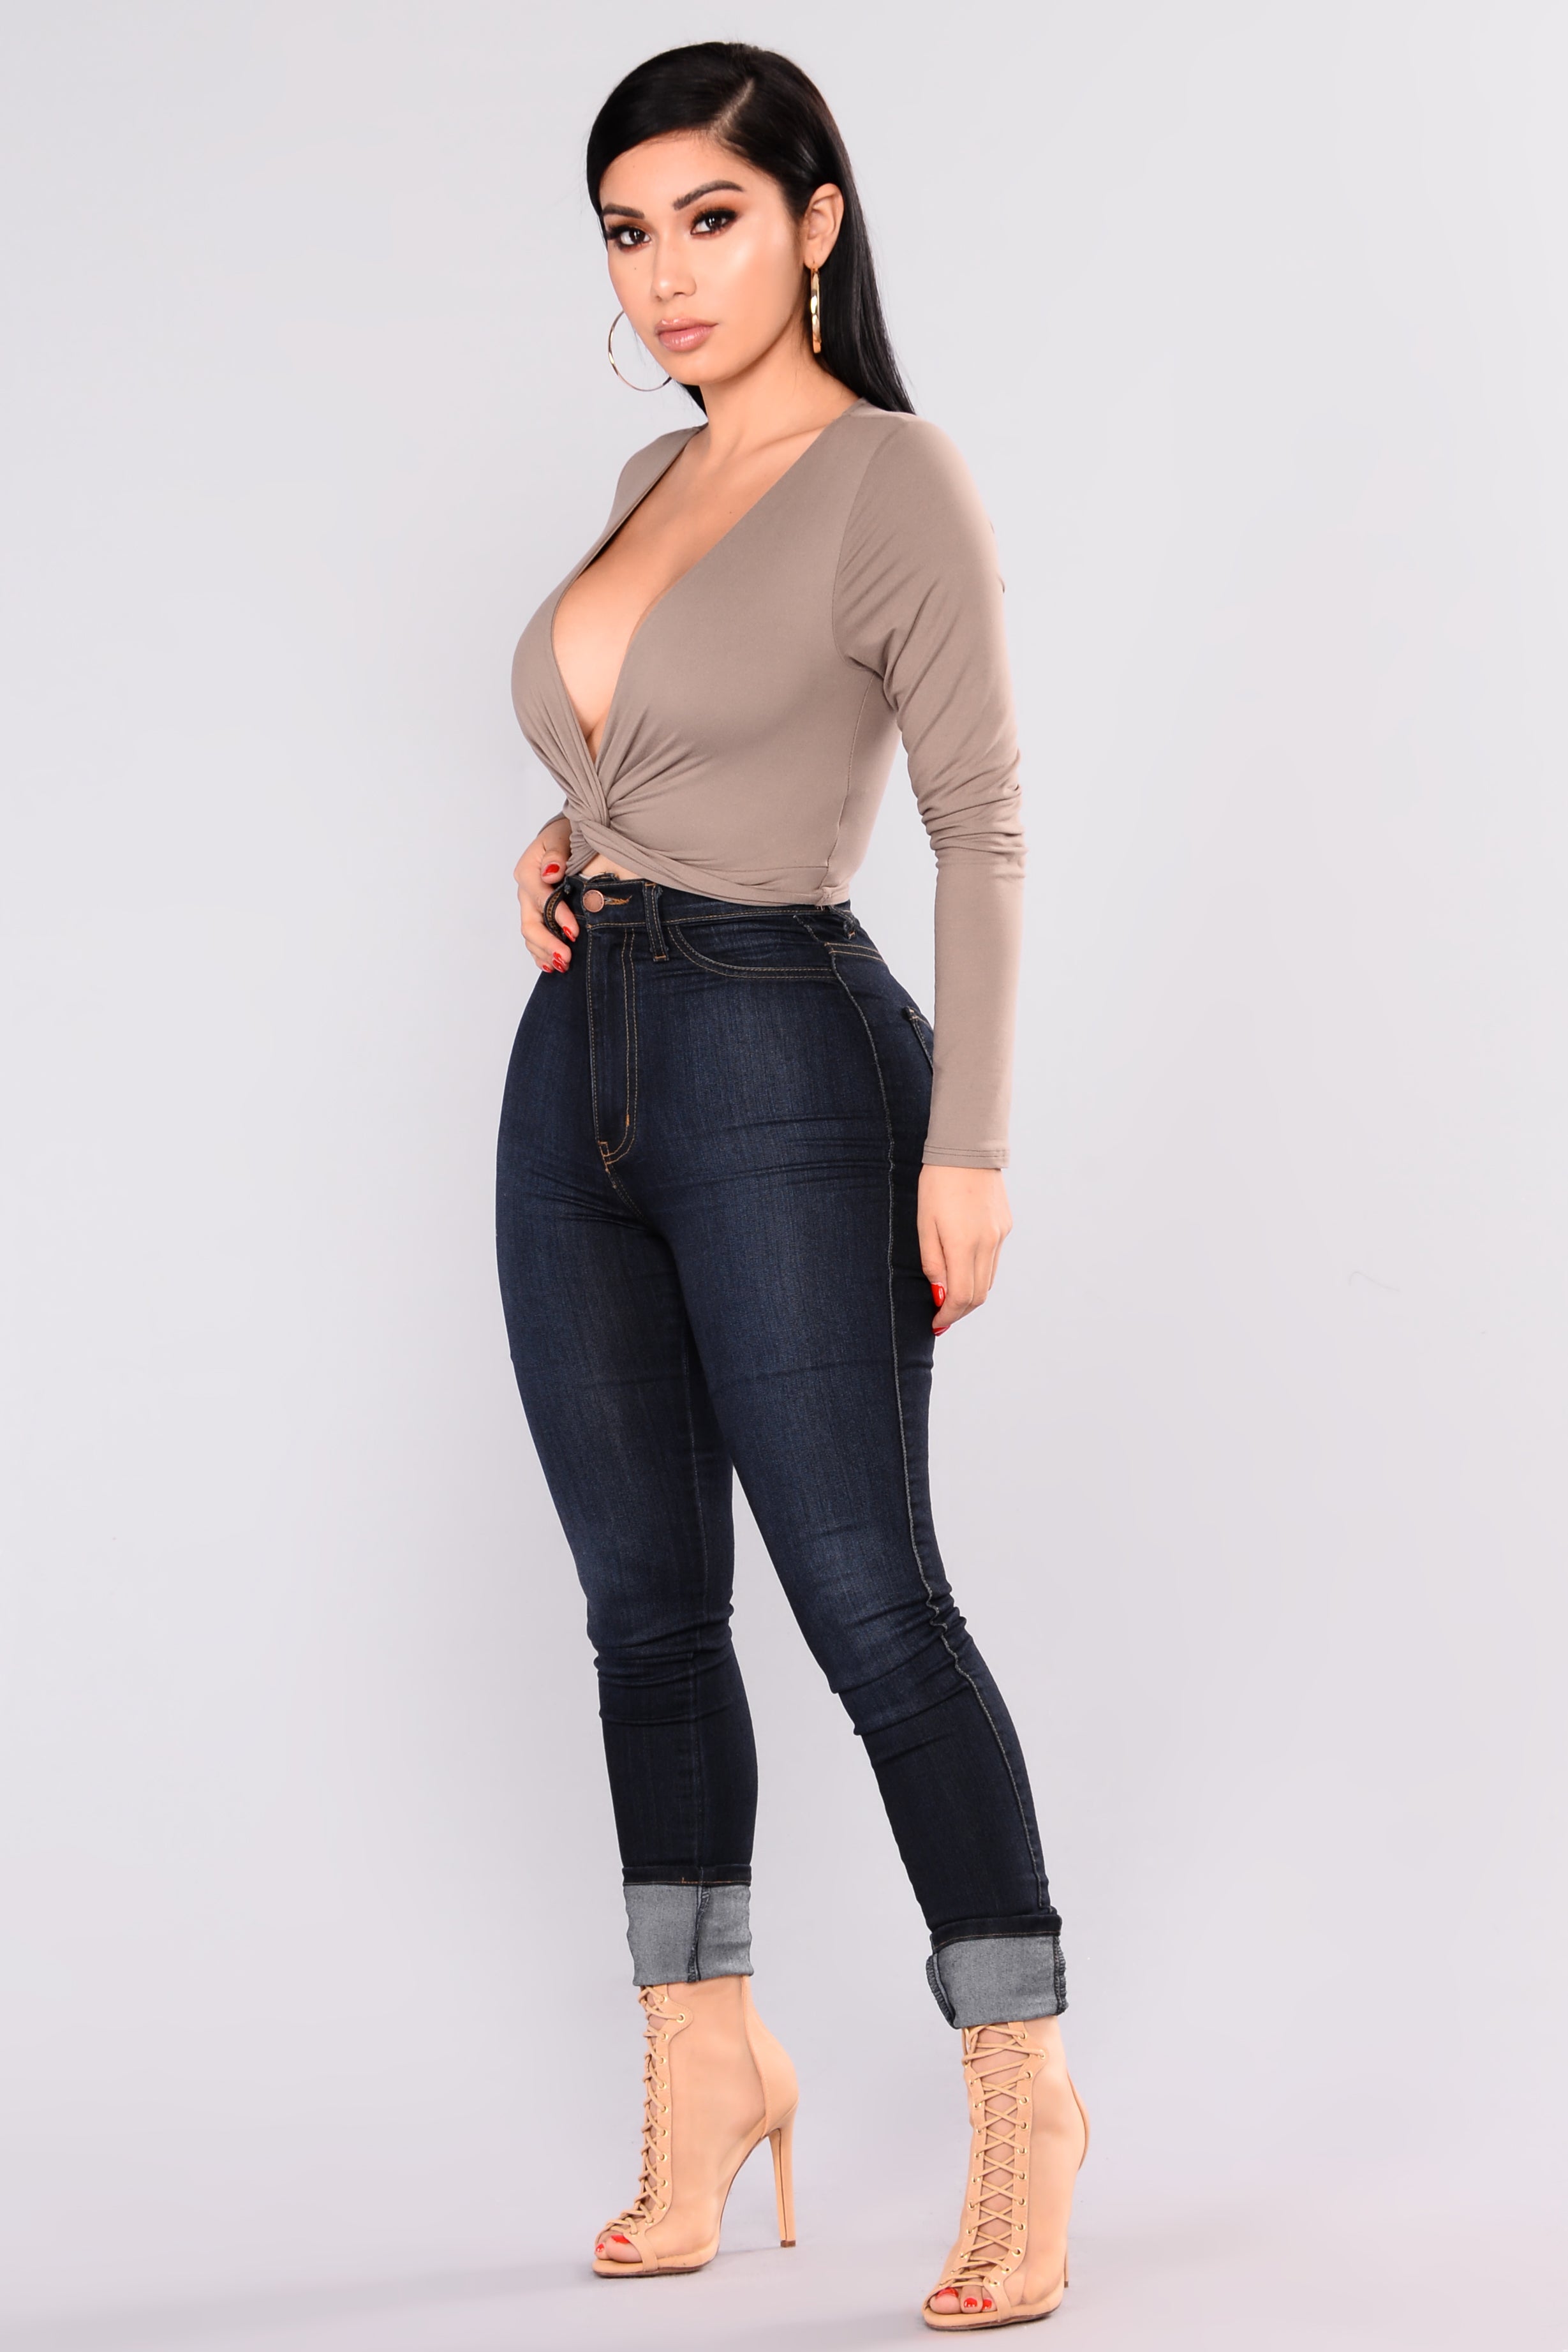 Cheryl Twist Front Top - Taupe